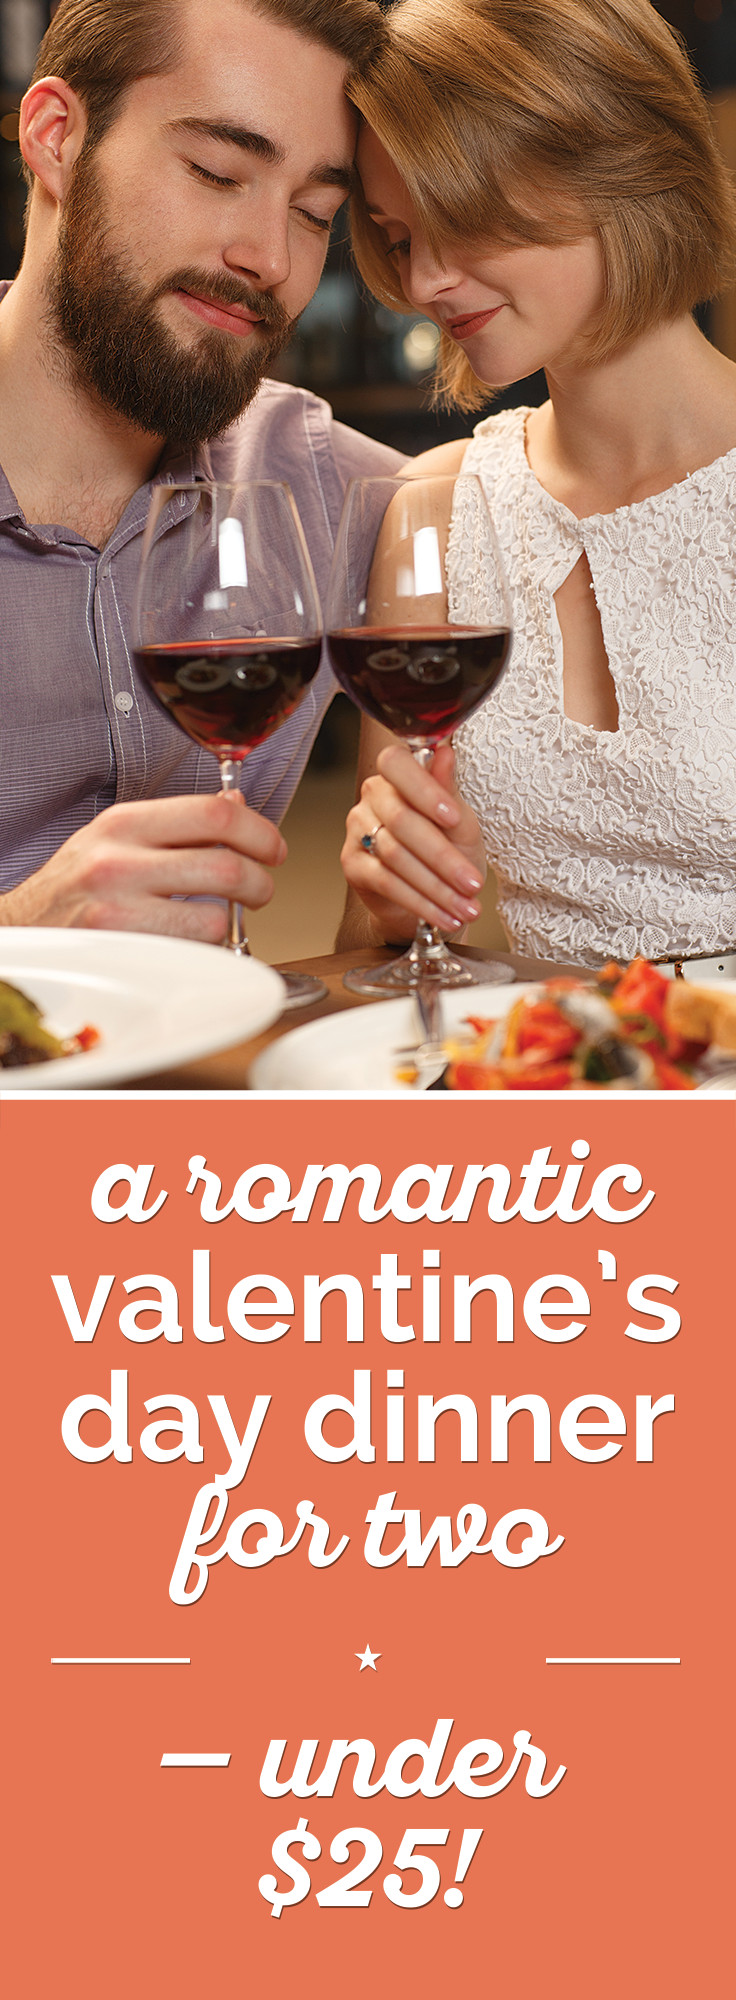 Valentine'S Day Dinners For Two
 A Romantic Valentine s Day Dinner for Two — Under $25